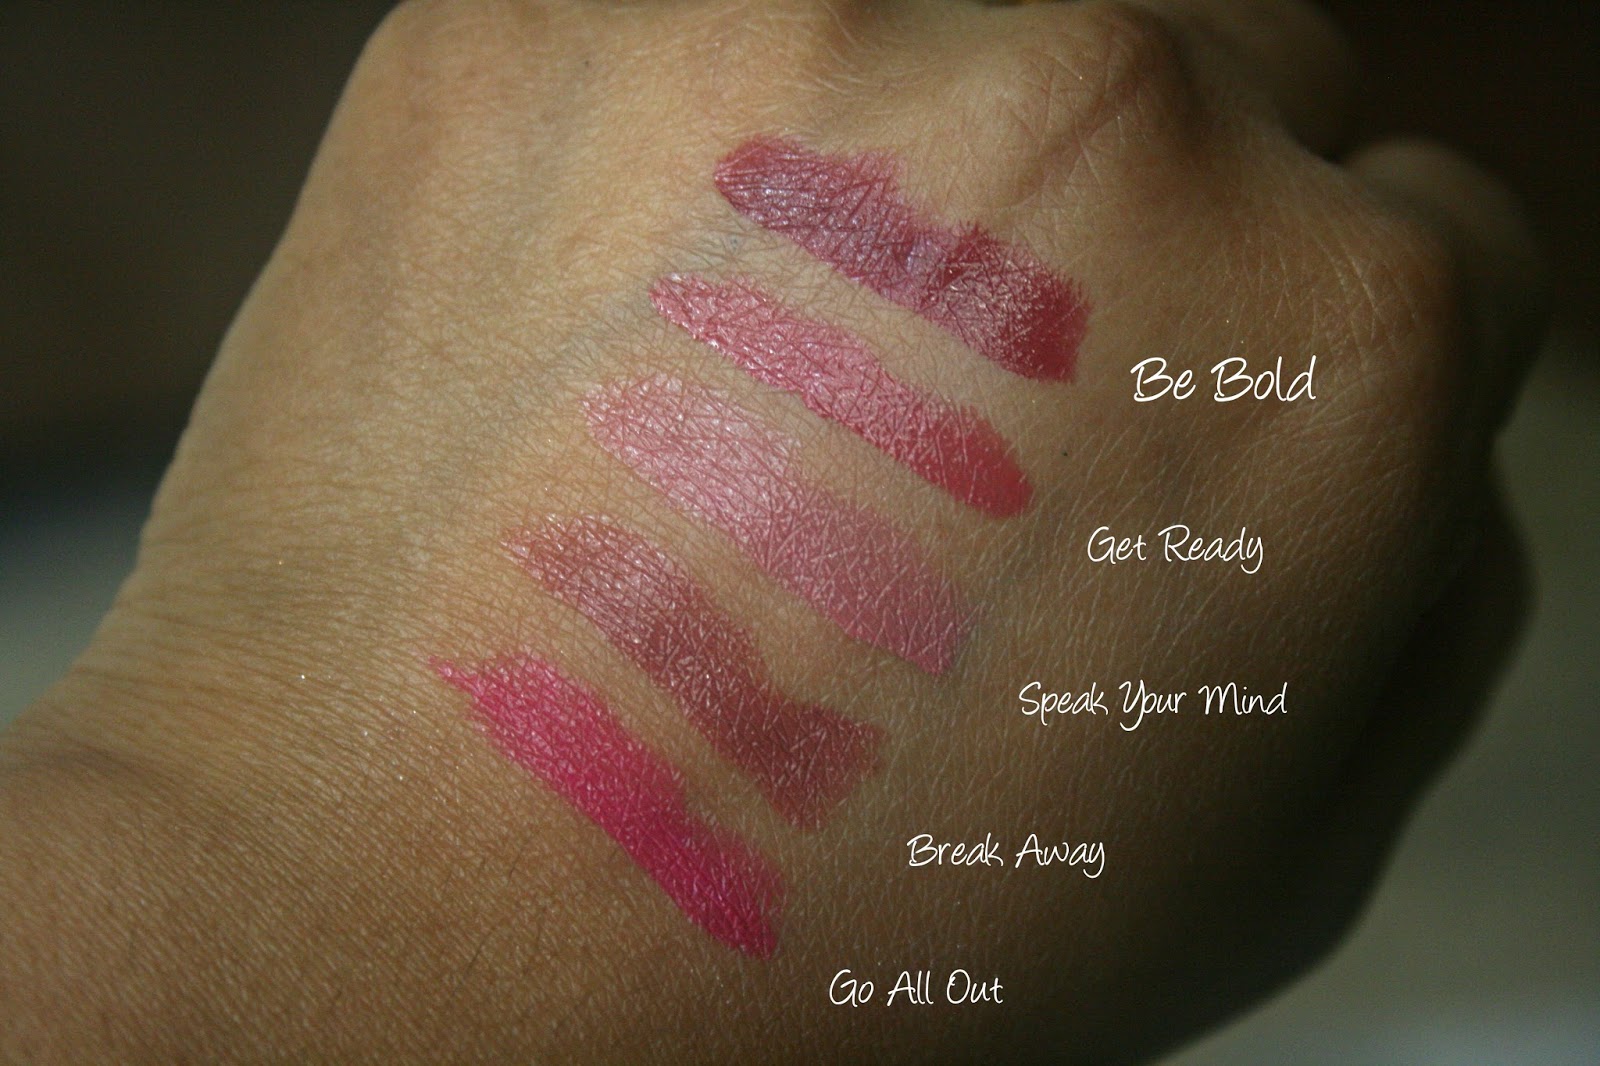 Makeup, Beauty and More bareMinerals Kiss & Tell